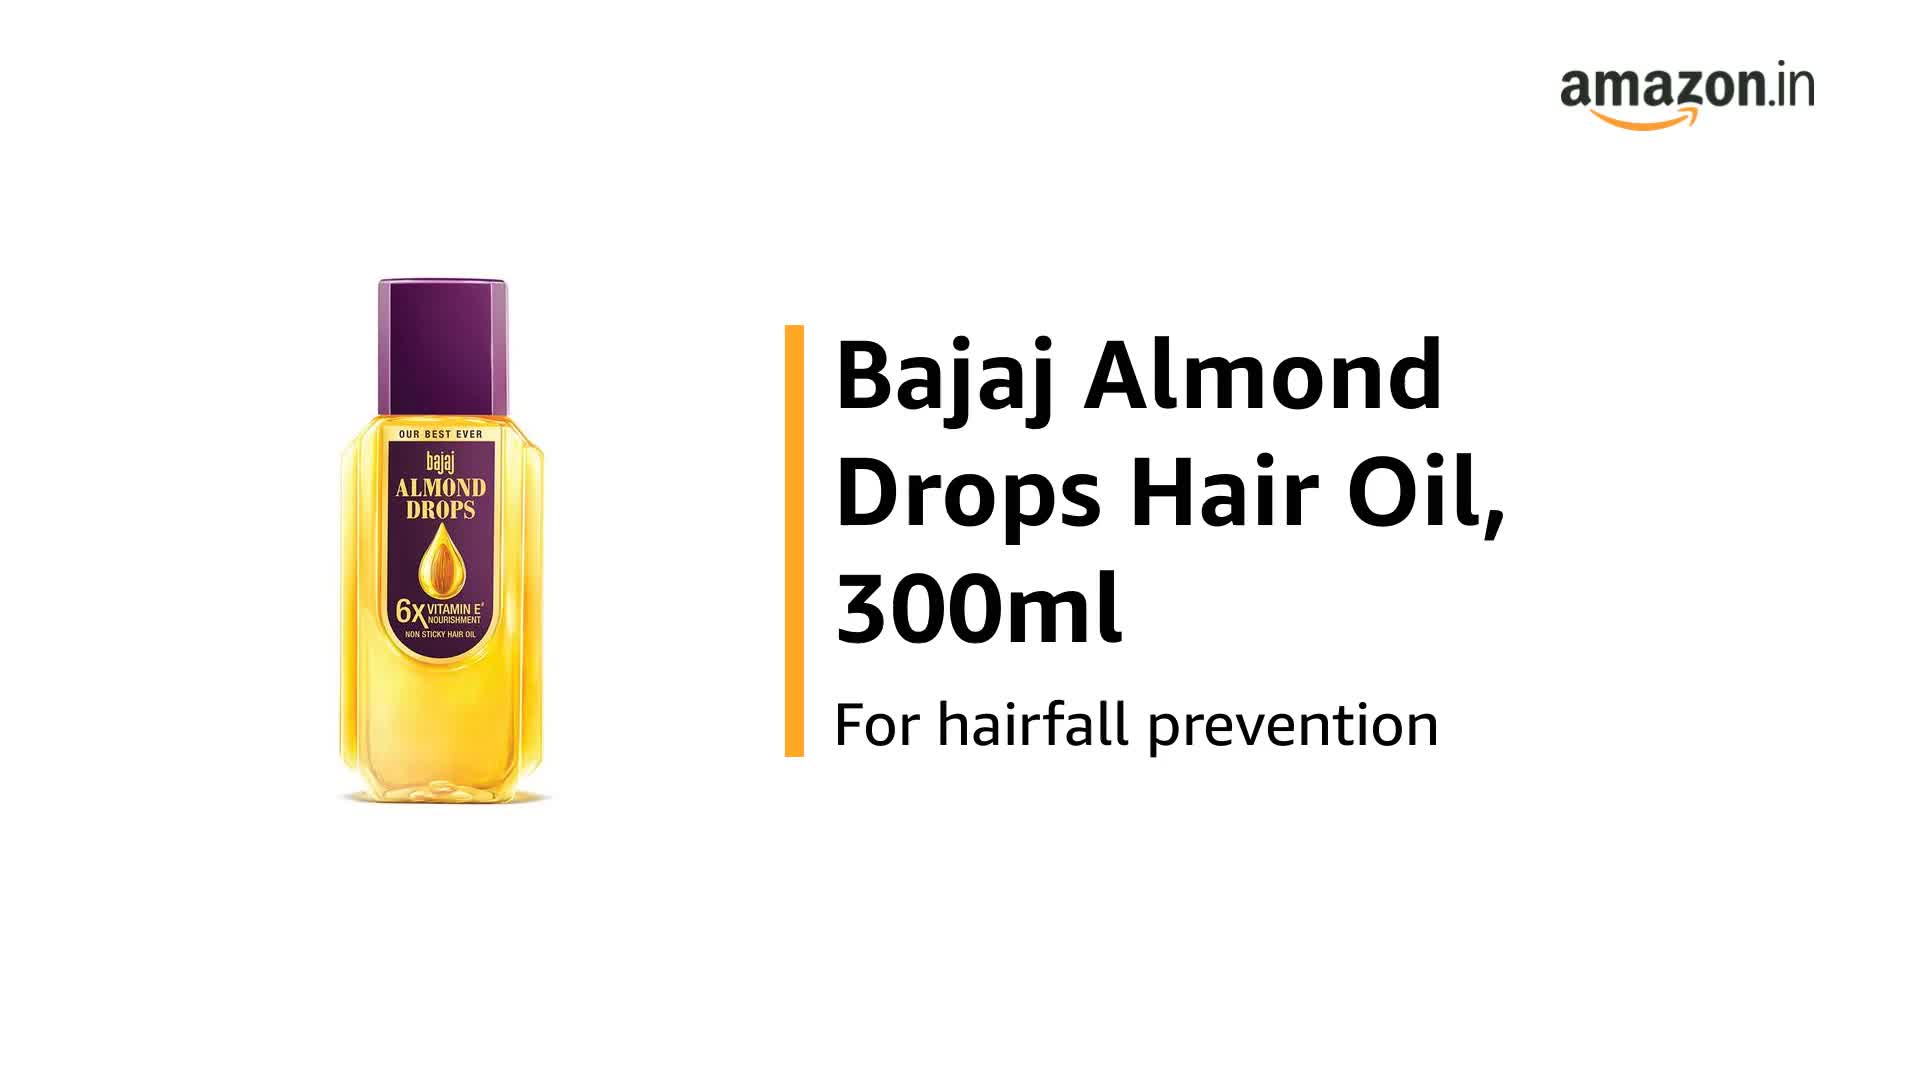 Bajaj Almonds Drops Hair Oil Pack of 1 650ml - the best price and delivery  | Globally